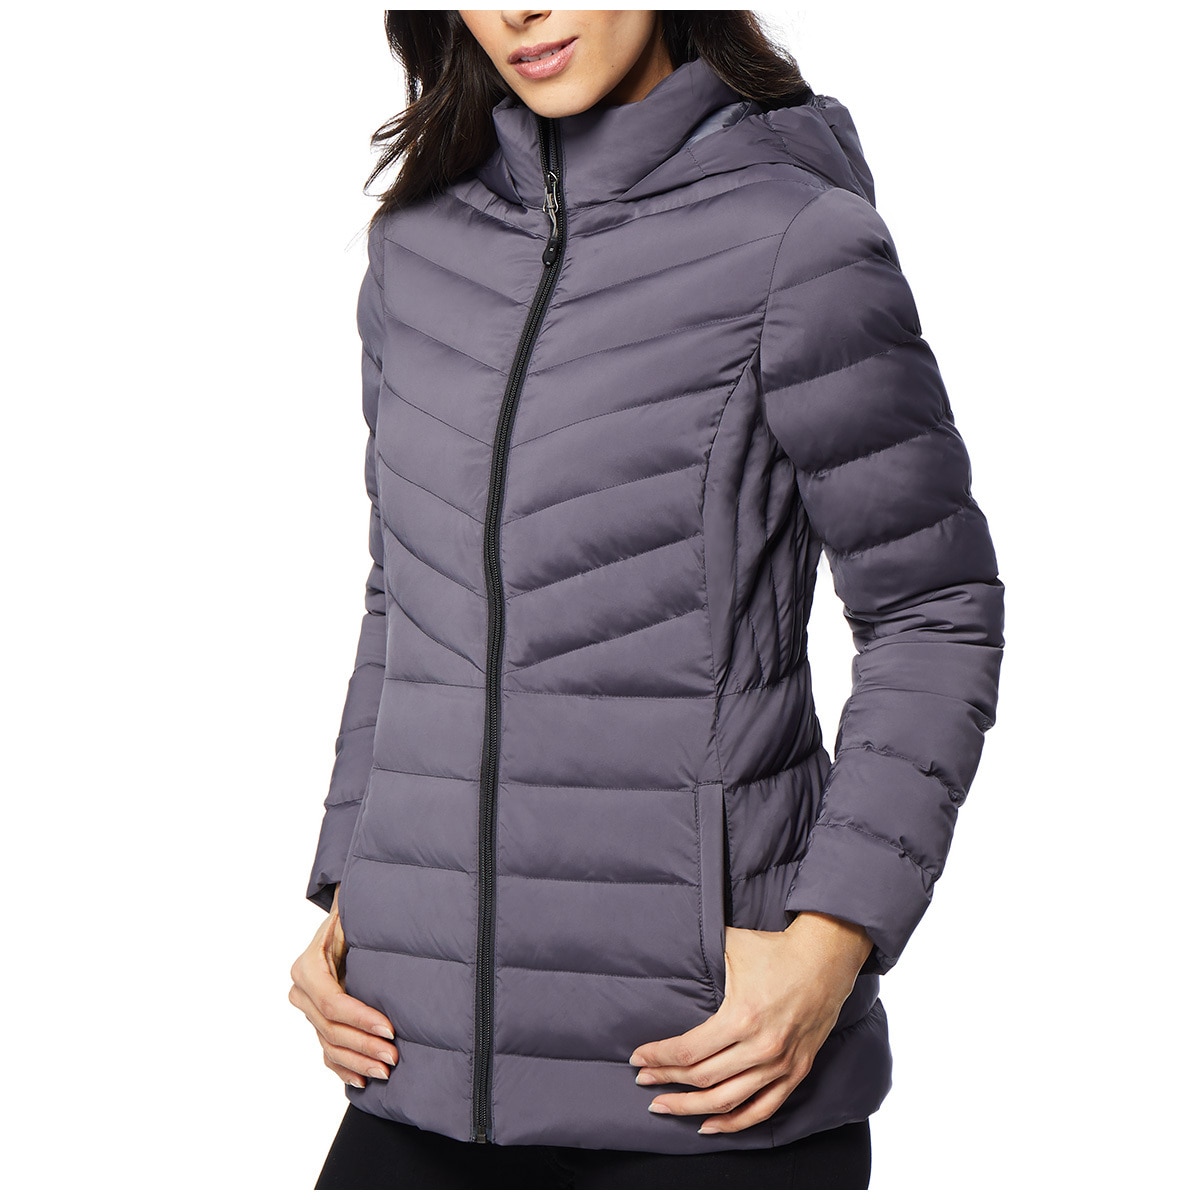 32 degrees down jacket costco Online - Off 59%